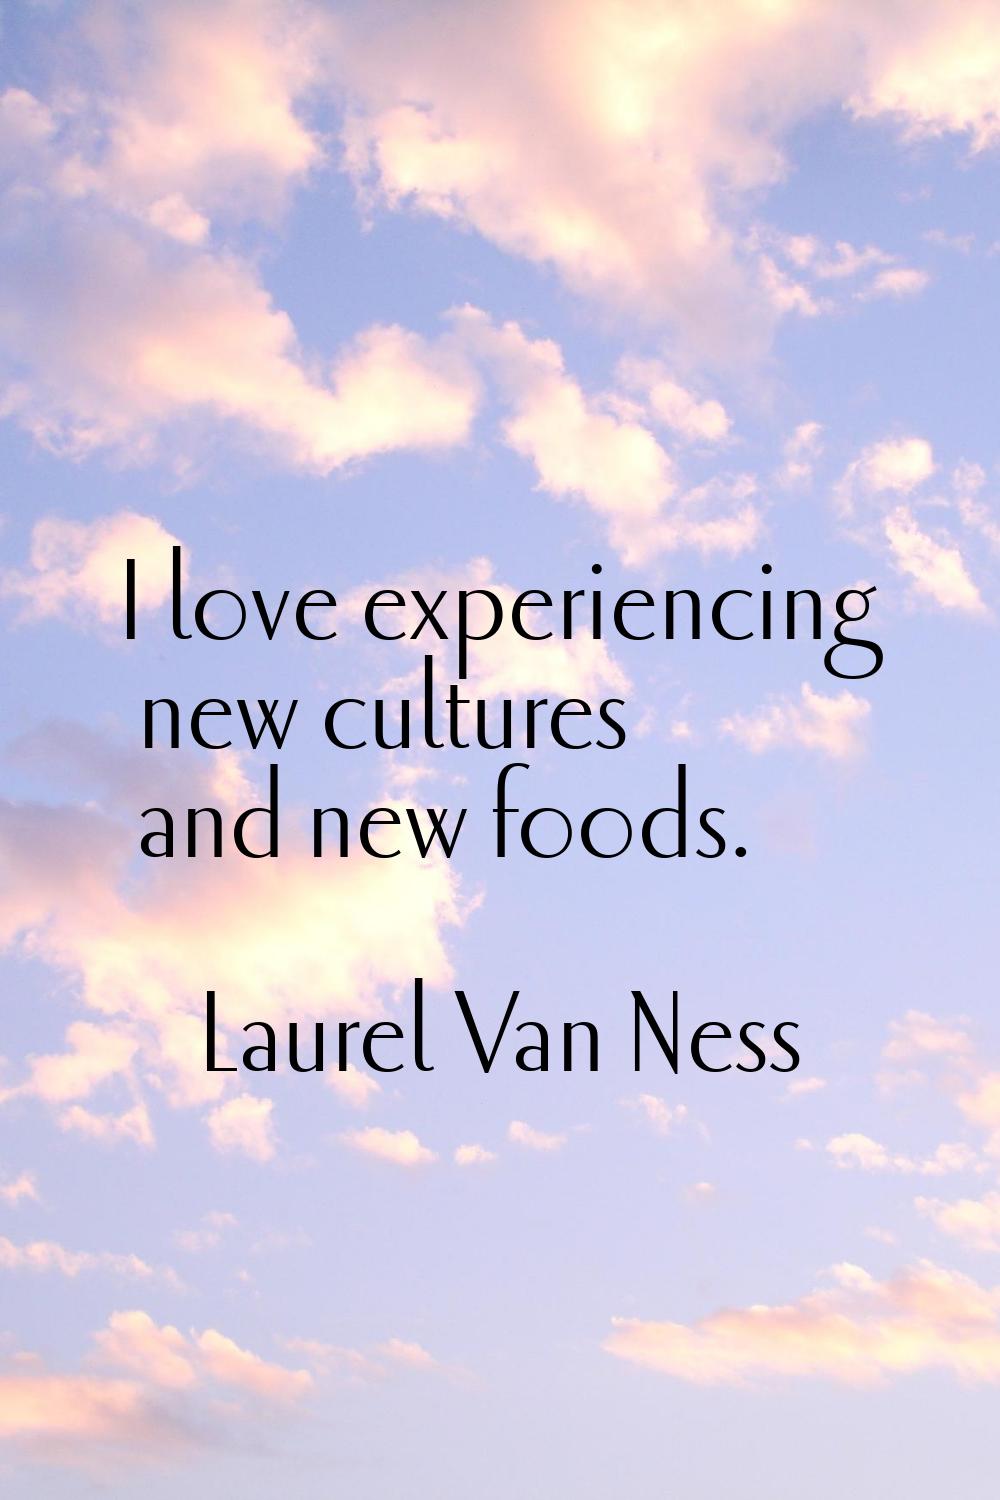 I love experiencing new cultures and new foods.